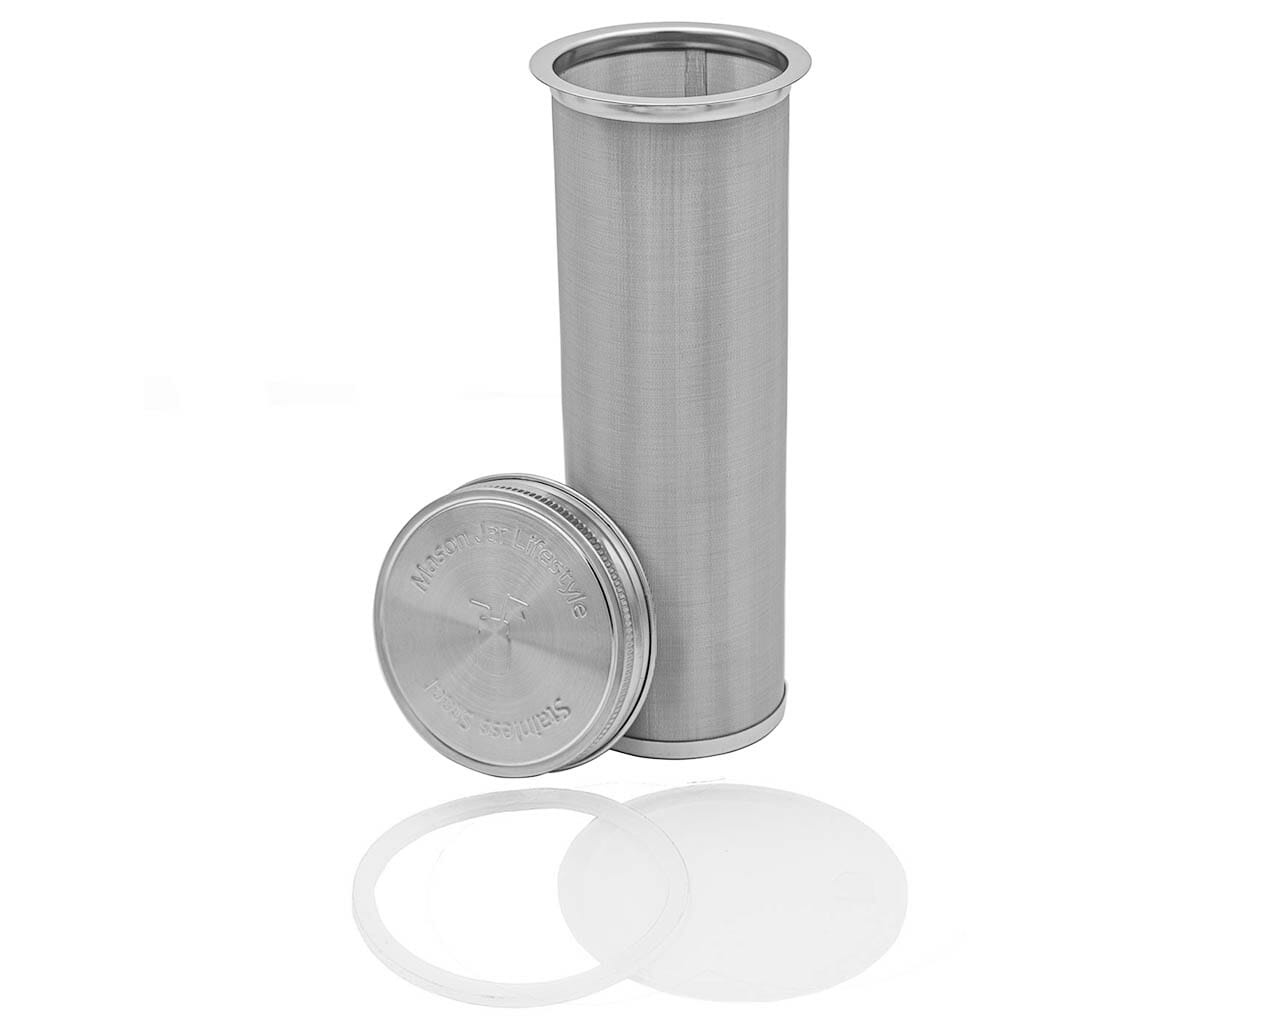 Cold Brew Coffee and Tea Maker Stainless Steel Filter (Fits Quart Size Wide  Mouth Jars)